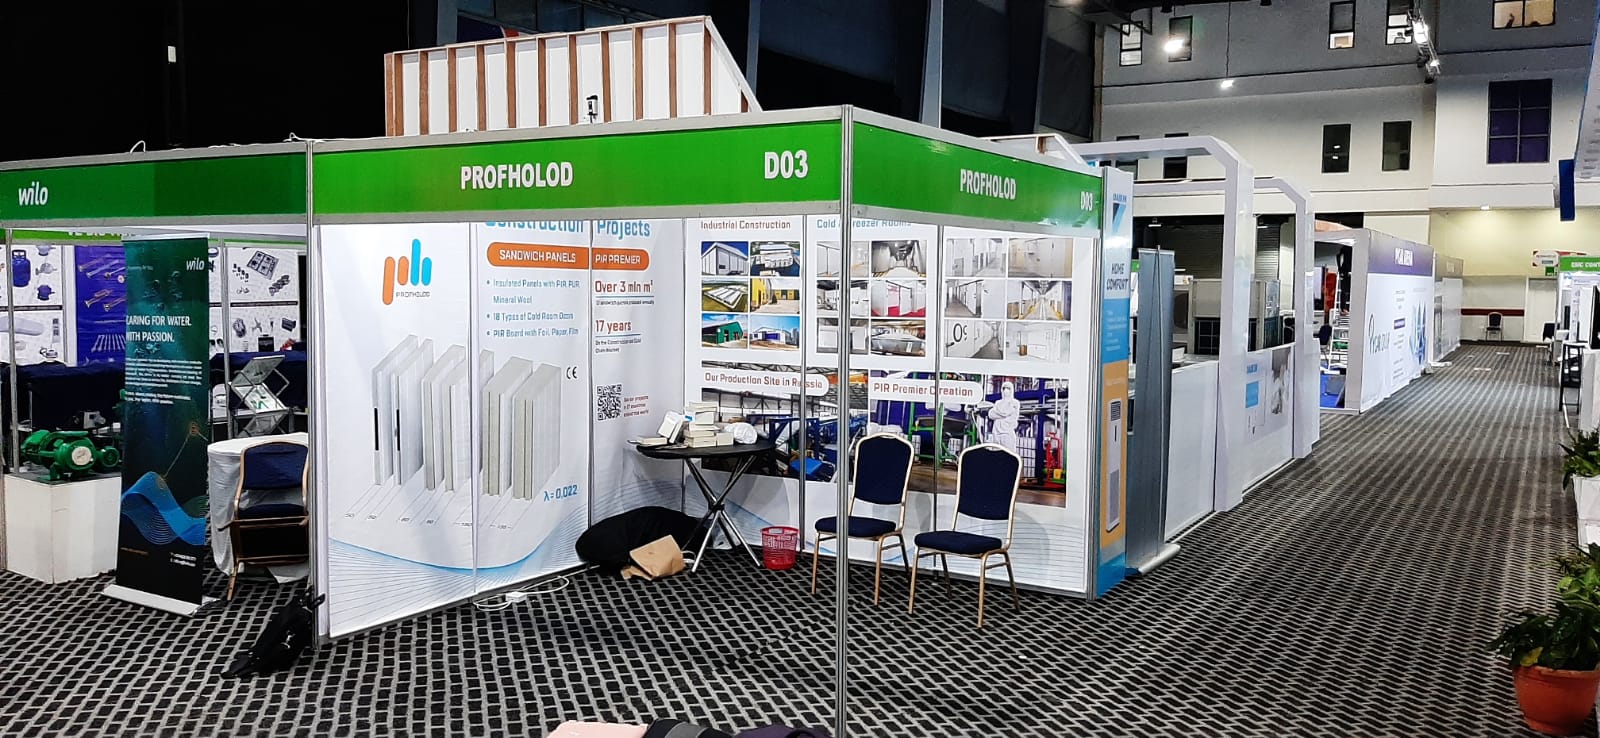 Energy Save Technologies for Africa: PH Insulation to Exhibit at Mega Clima Expo in Nigeria